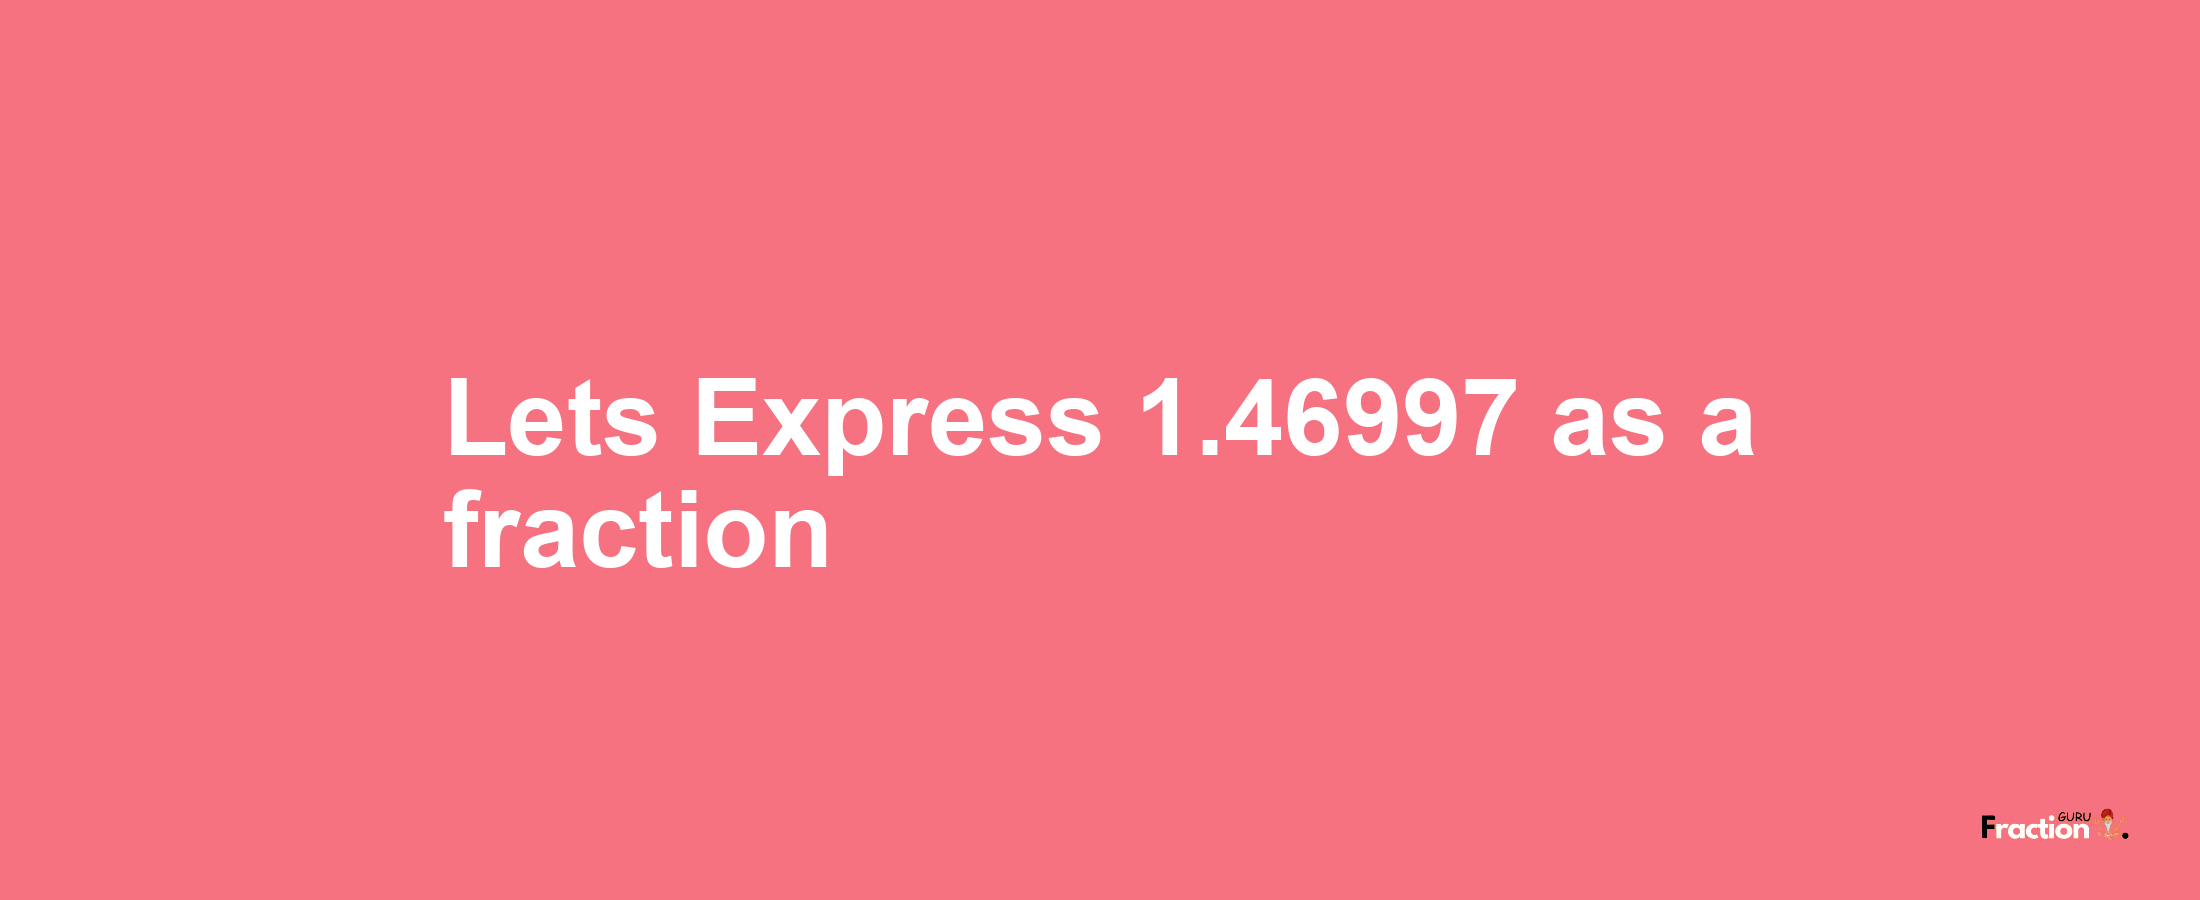 Lets Express 1.46997 as afraction